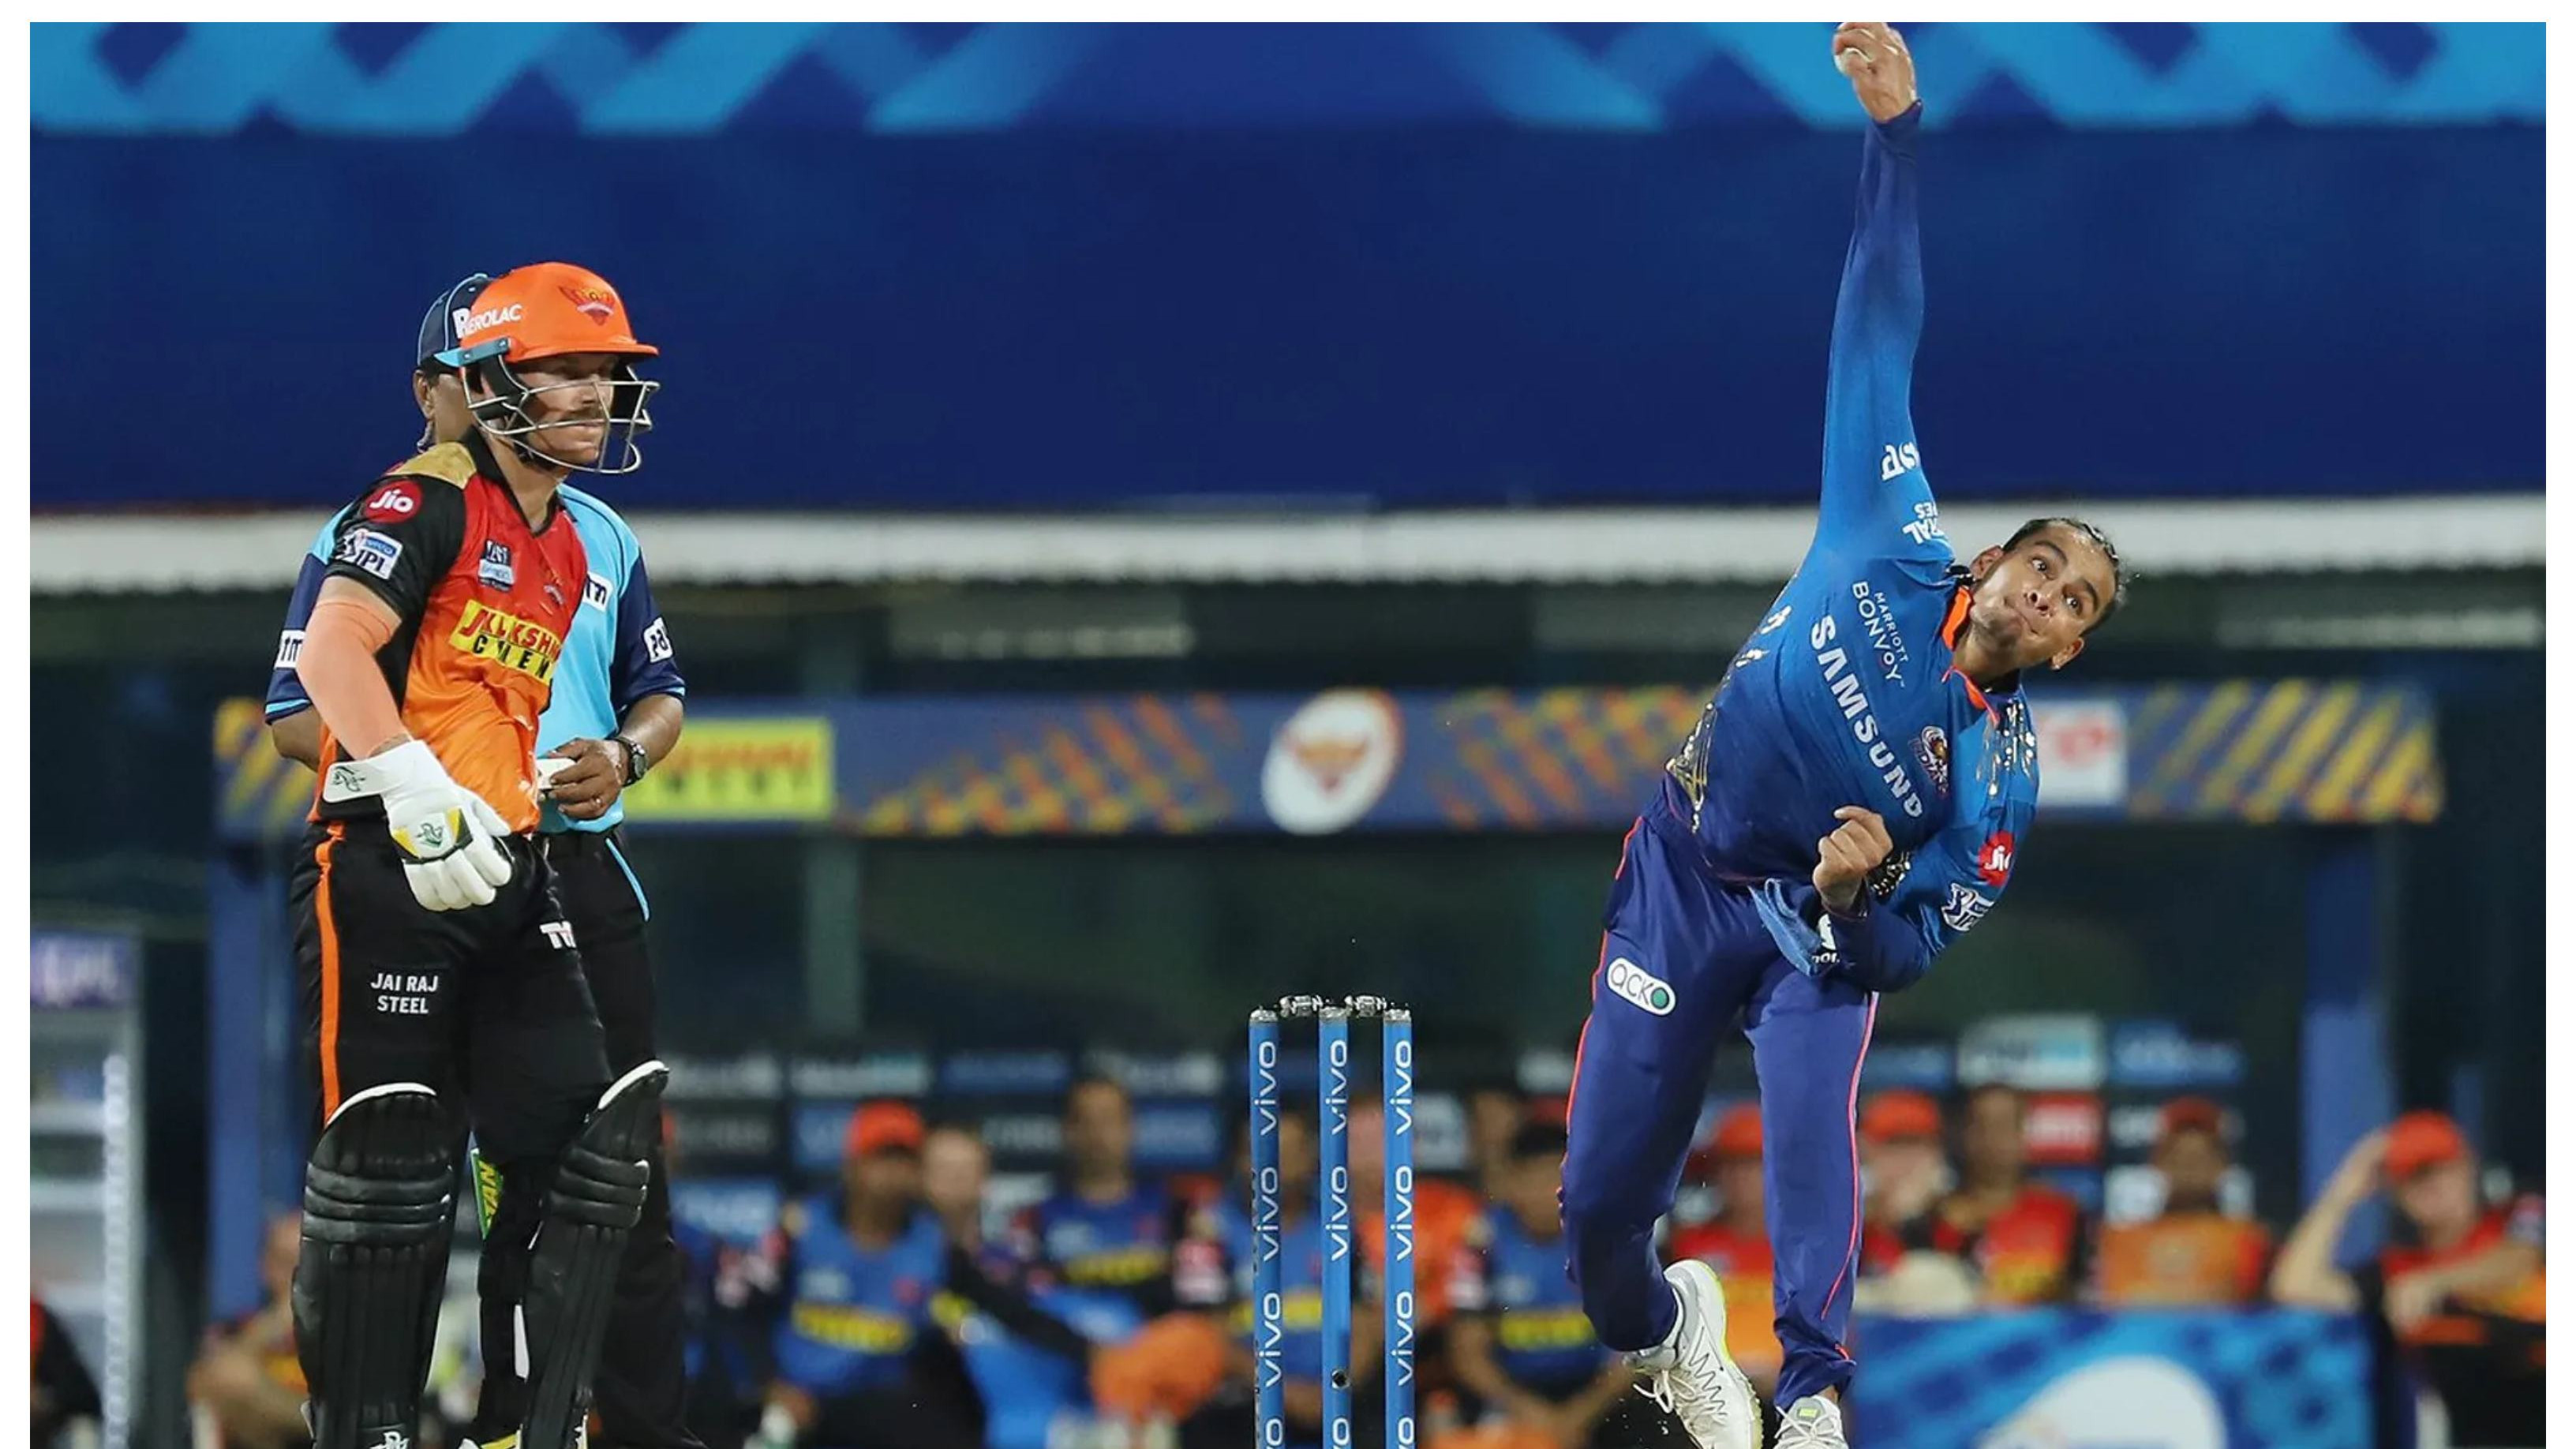 IPL 2021: David Warner rues not playing smart cricket in the middle overs after SRH’s loss to MI